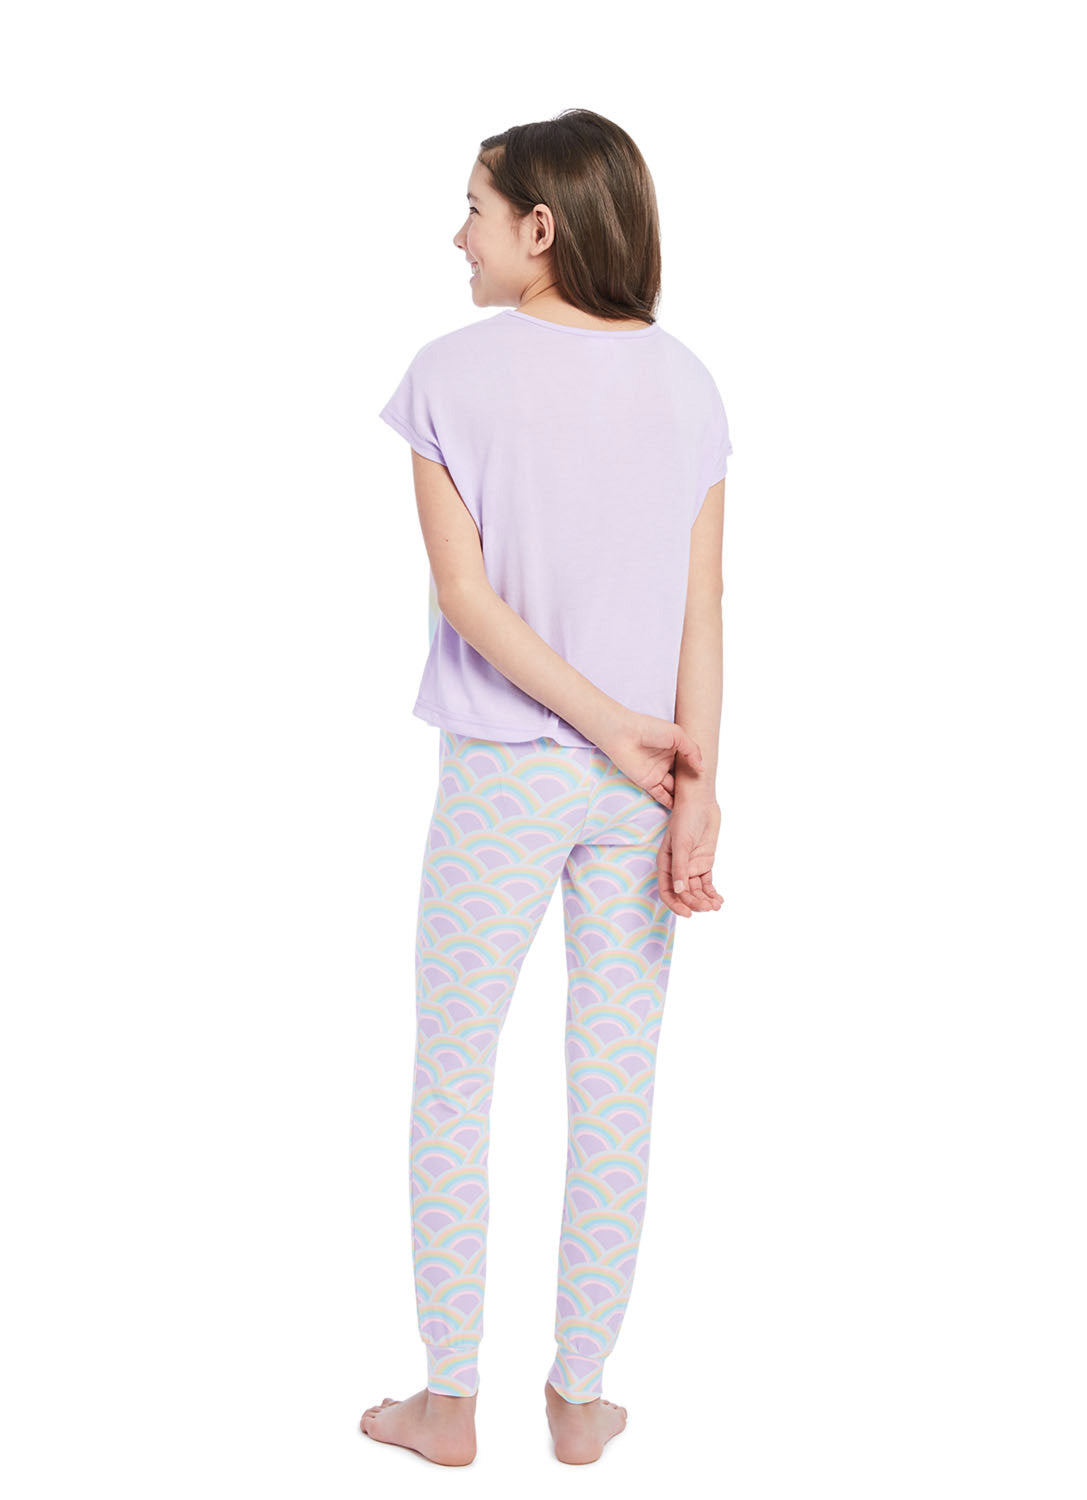 Back view Girl wearing Rainbows Pj set, t-shirt (lilac) with print and Pants (lilac) with Rainbows print